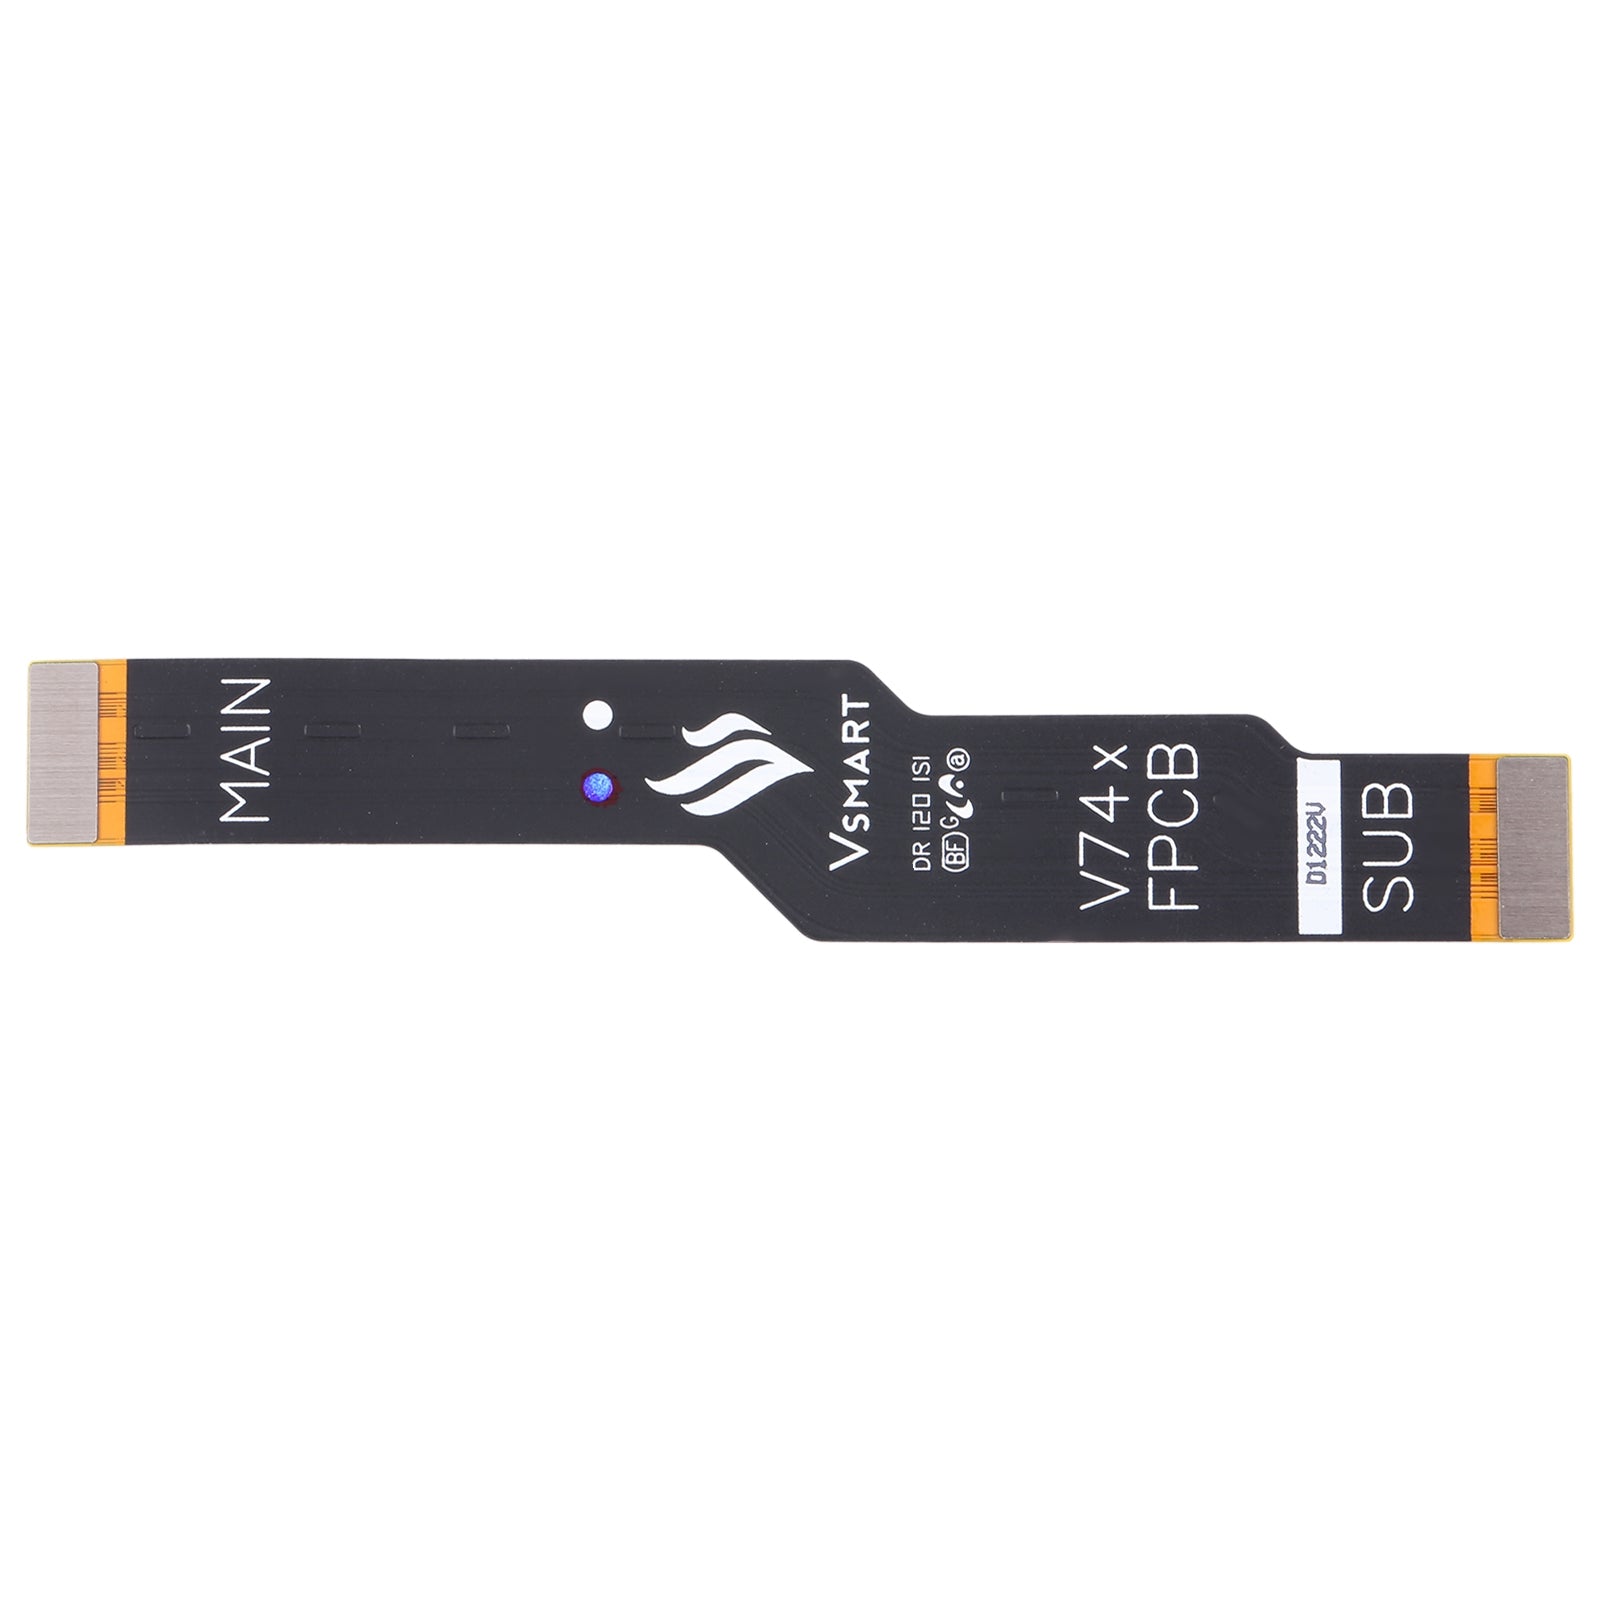 Vsmart Airs 4 Plate Connector Flex Cable